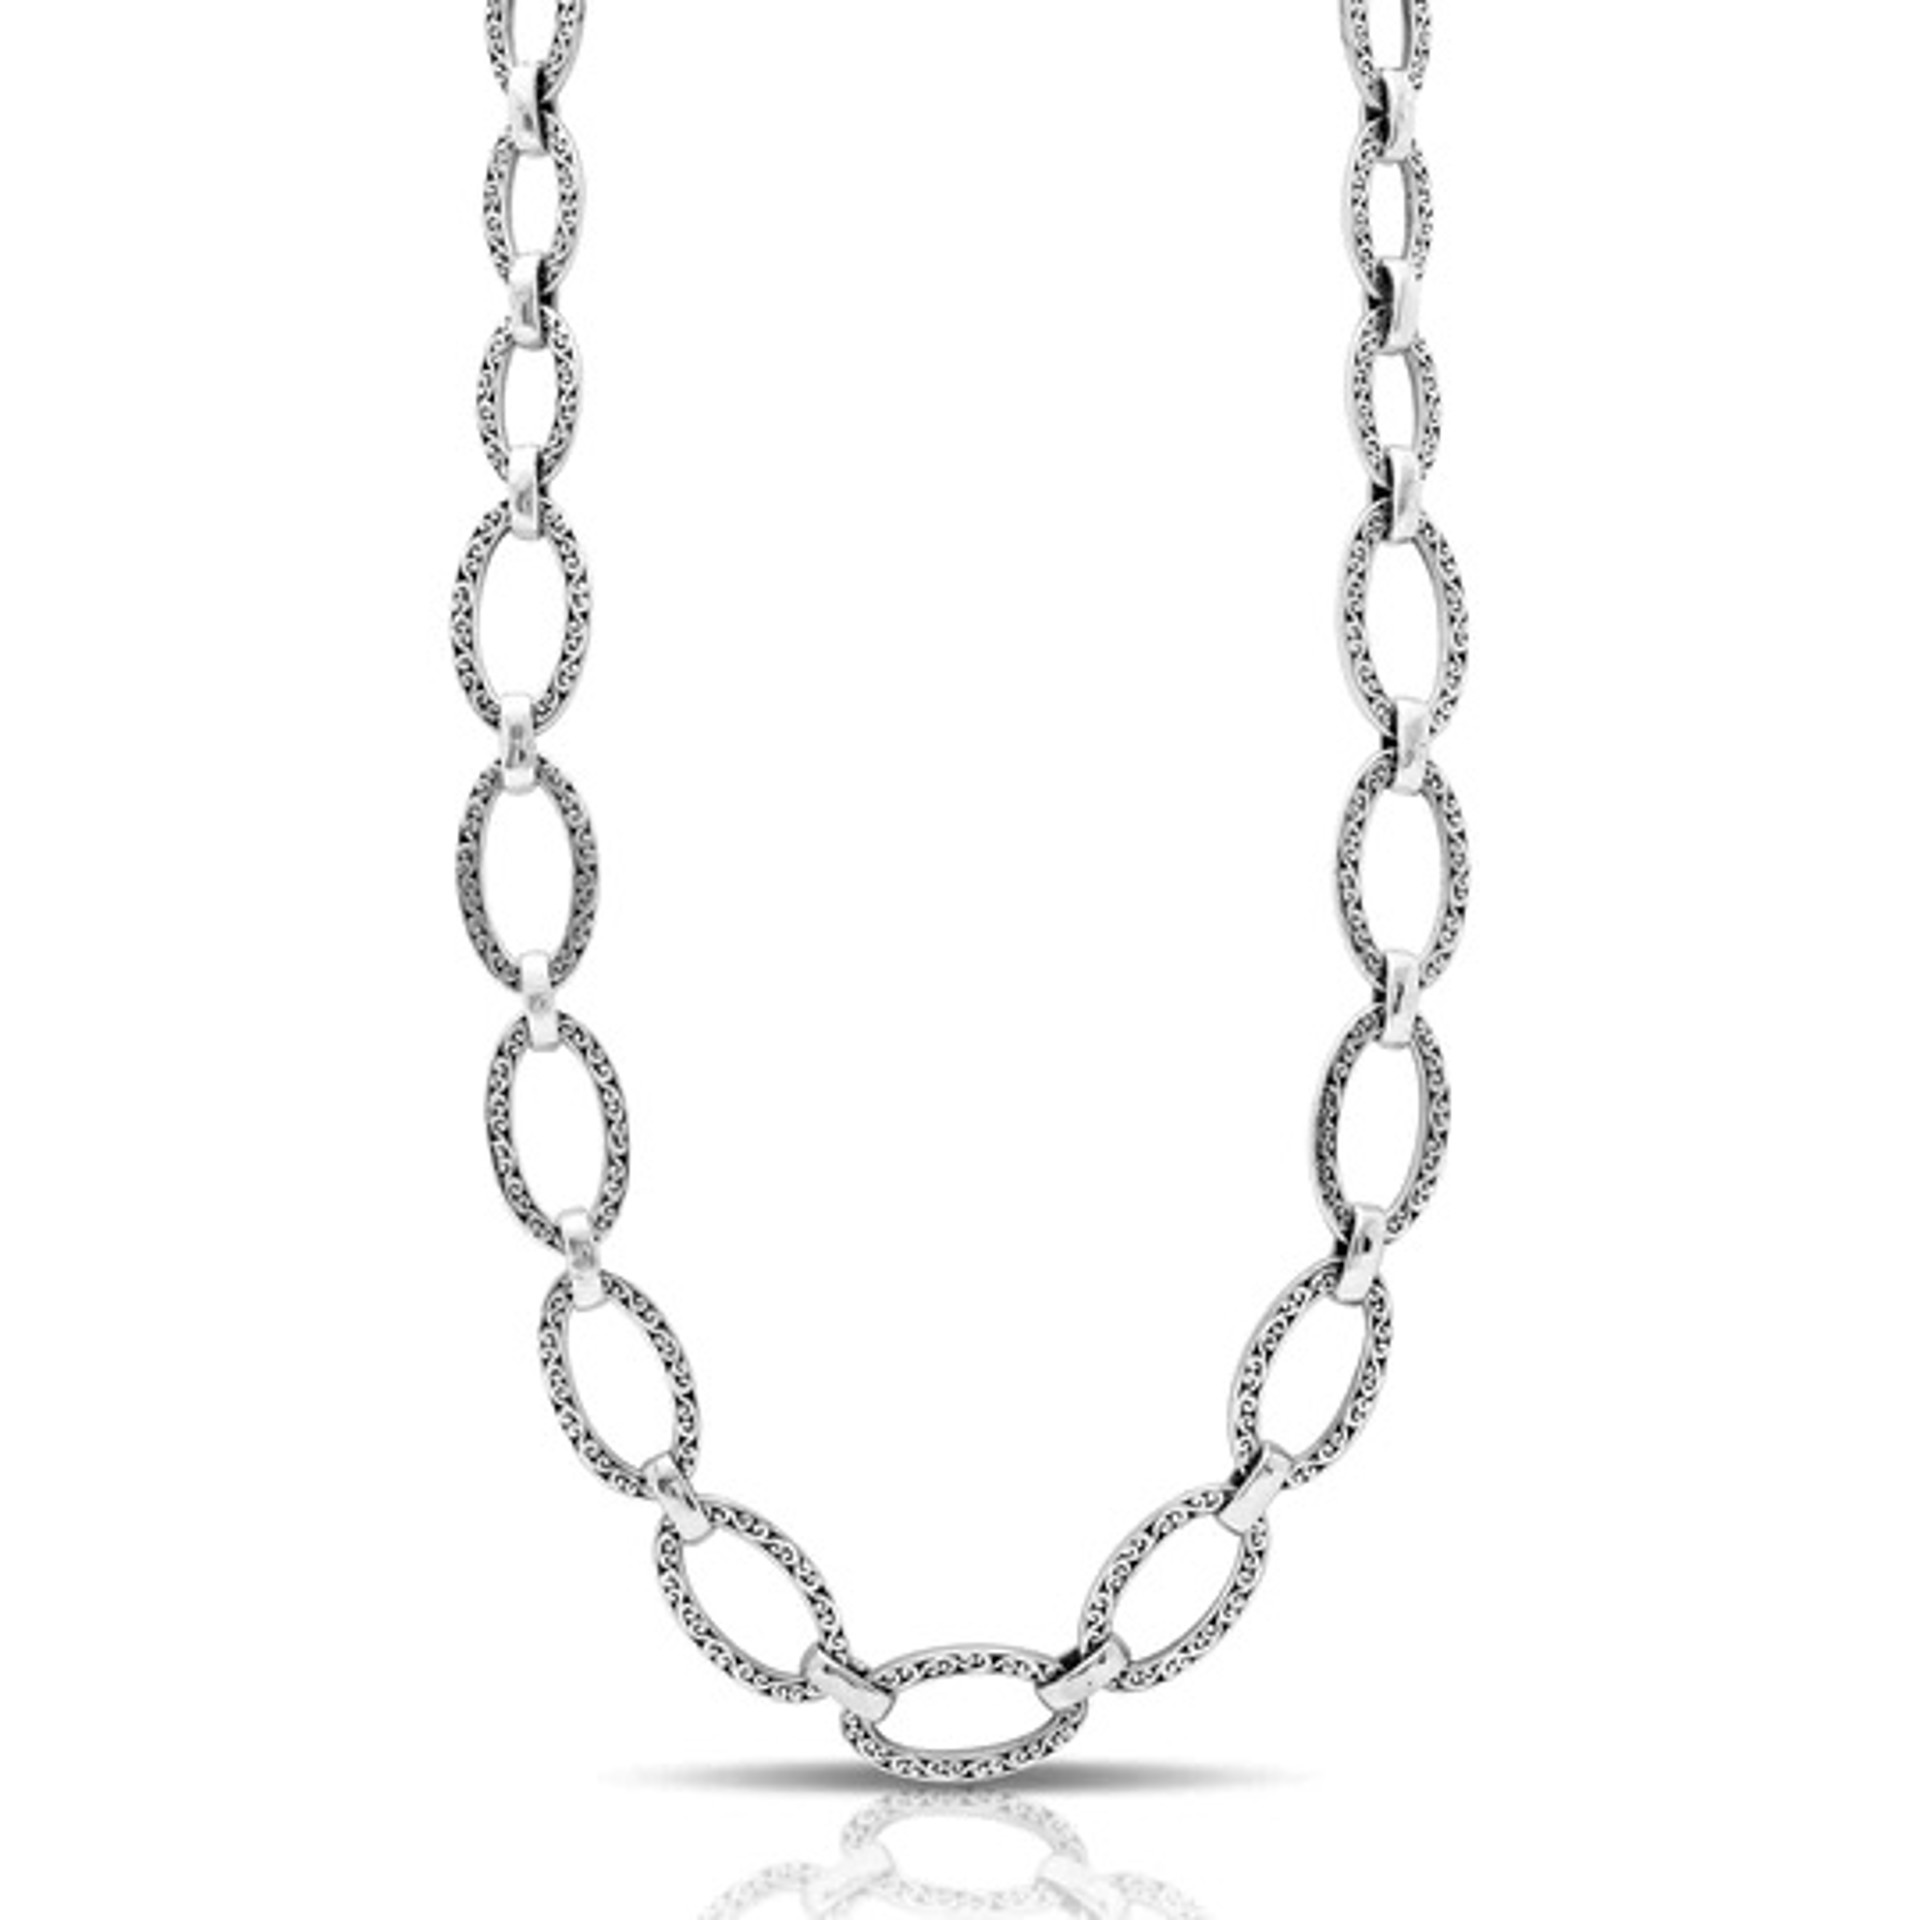 1024 LH Scroll Square Sided Oval Link Tapered Necklace 19" - 22" (SO) by Lois Hill